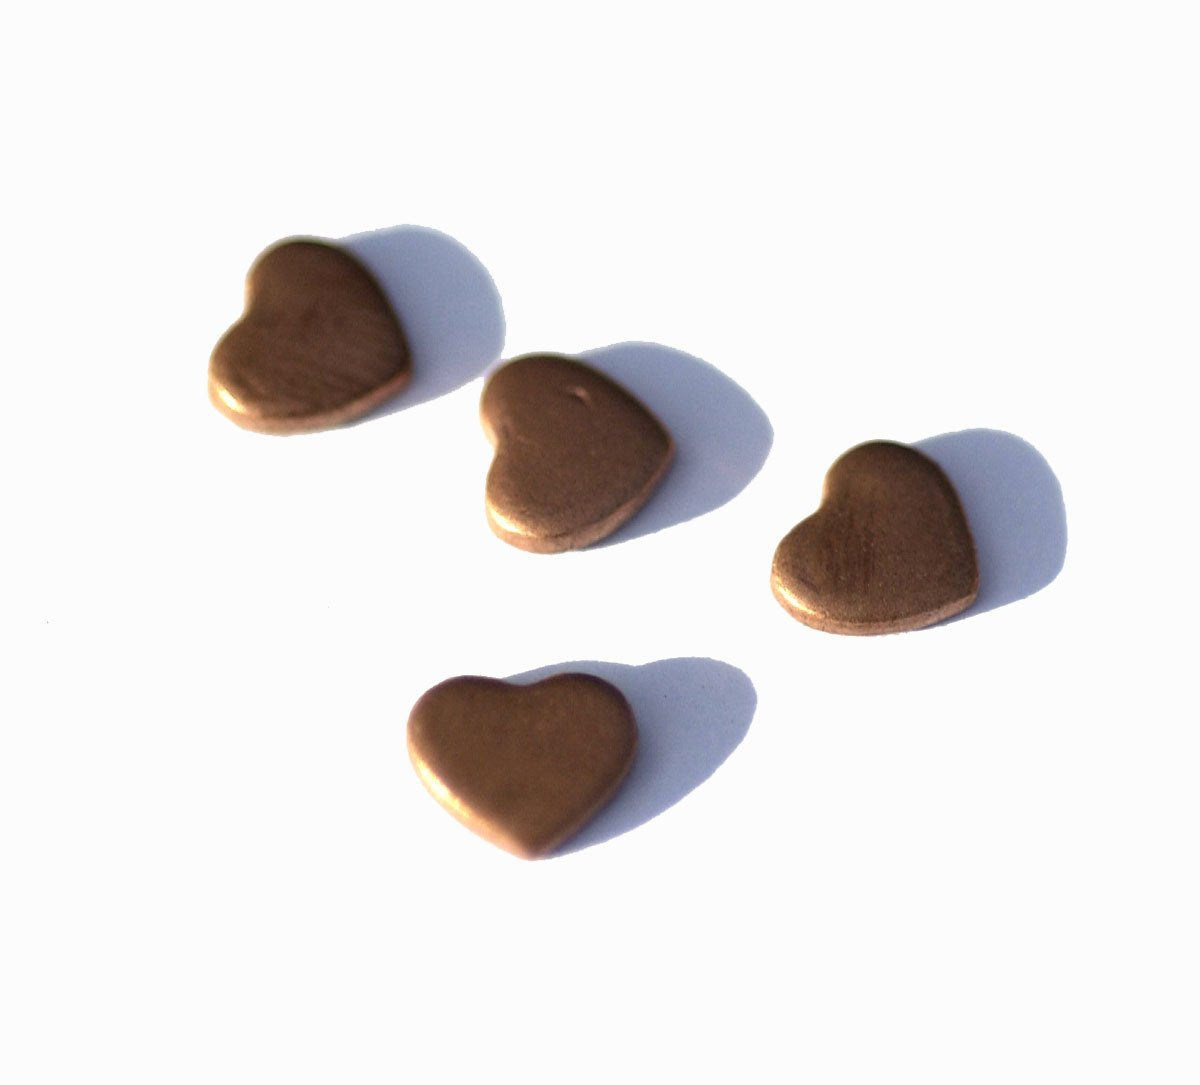 Copper Heart Classic 6mm x 5mm Heart Blanks Cutout for Enameling Stamping Texturing Variety of Metals